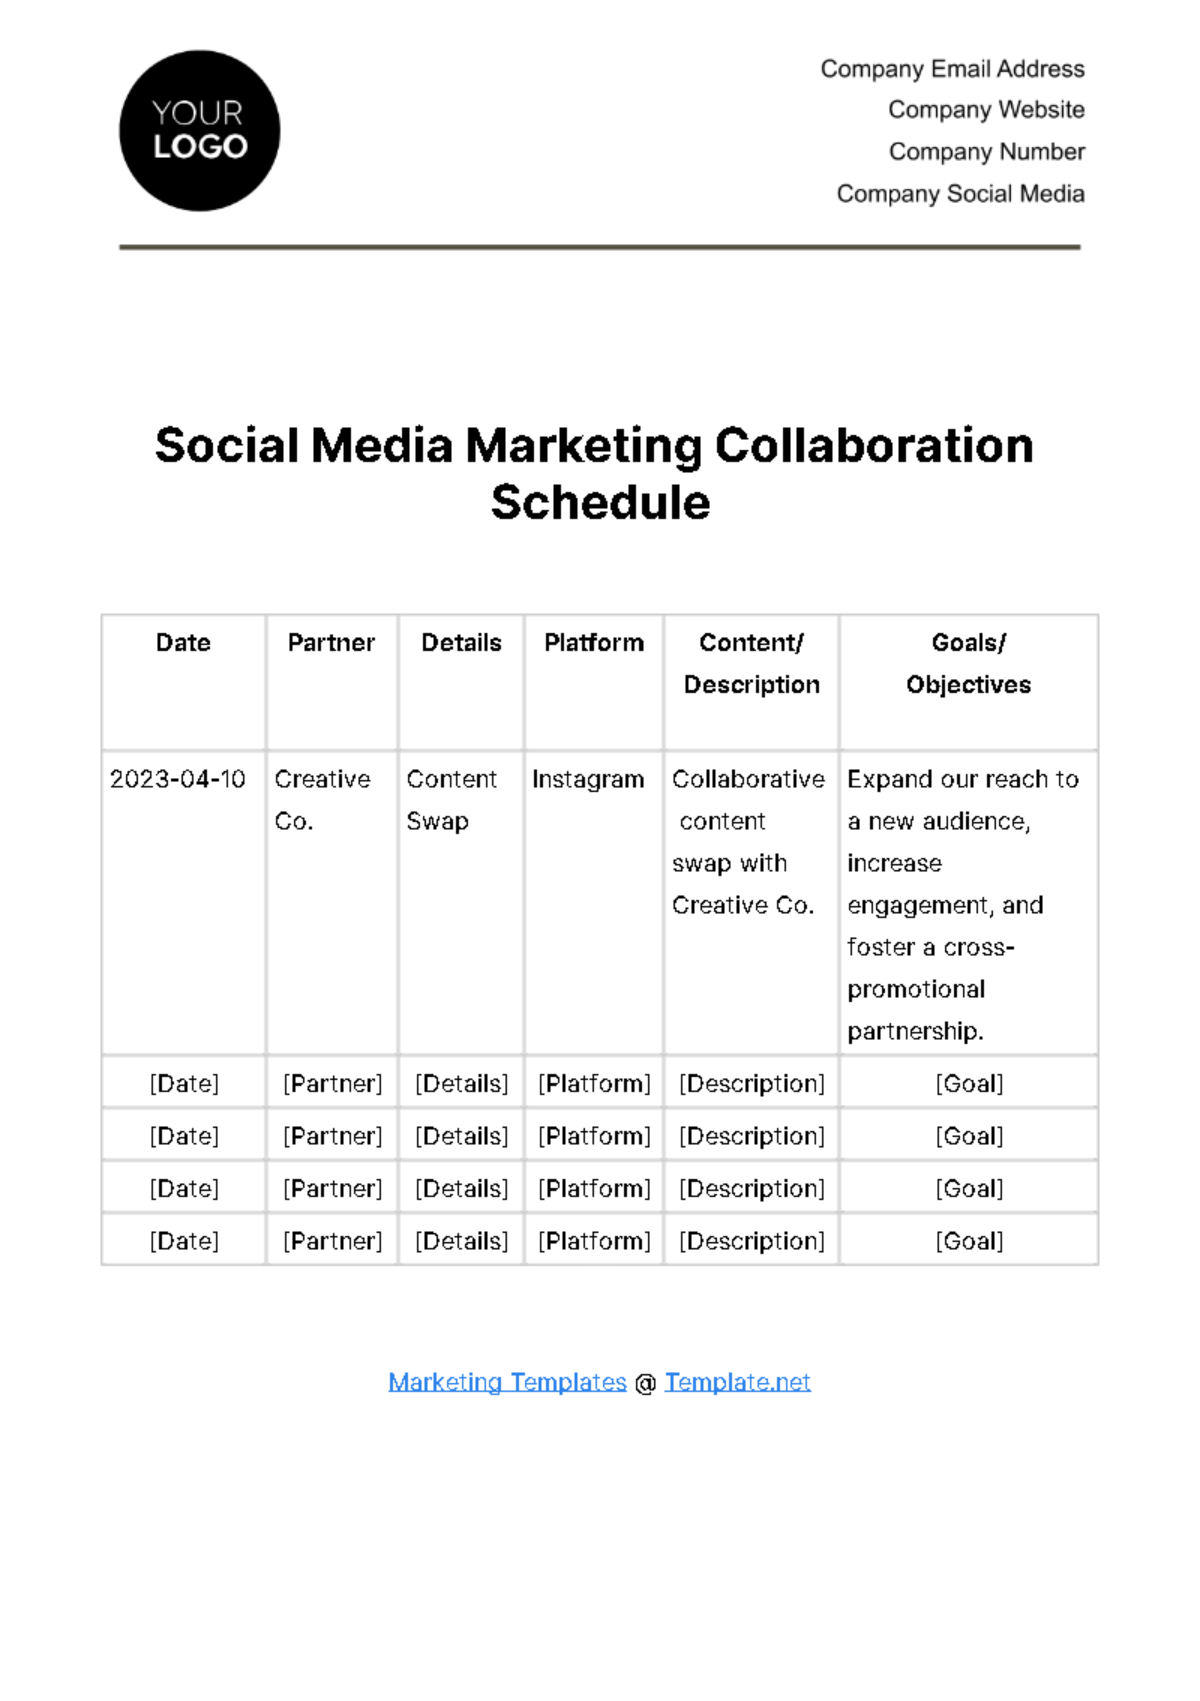 Free Social Media Marketing Collaboration Schedule Template